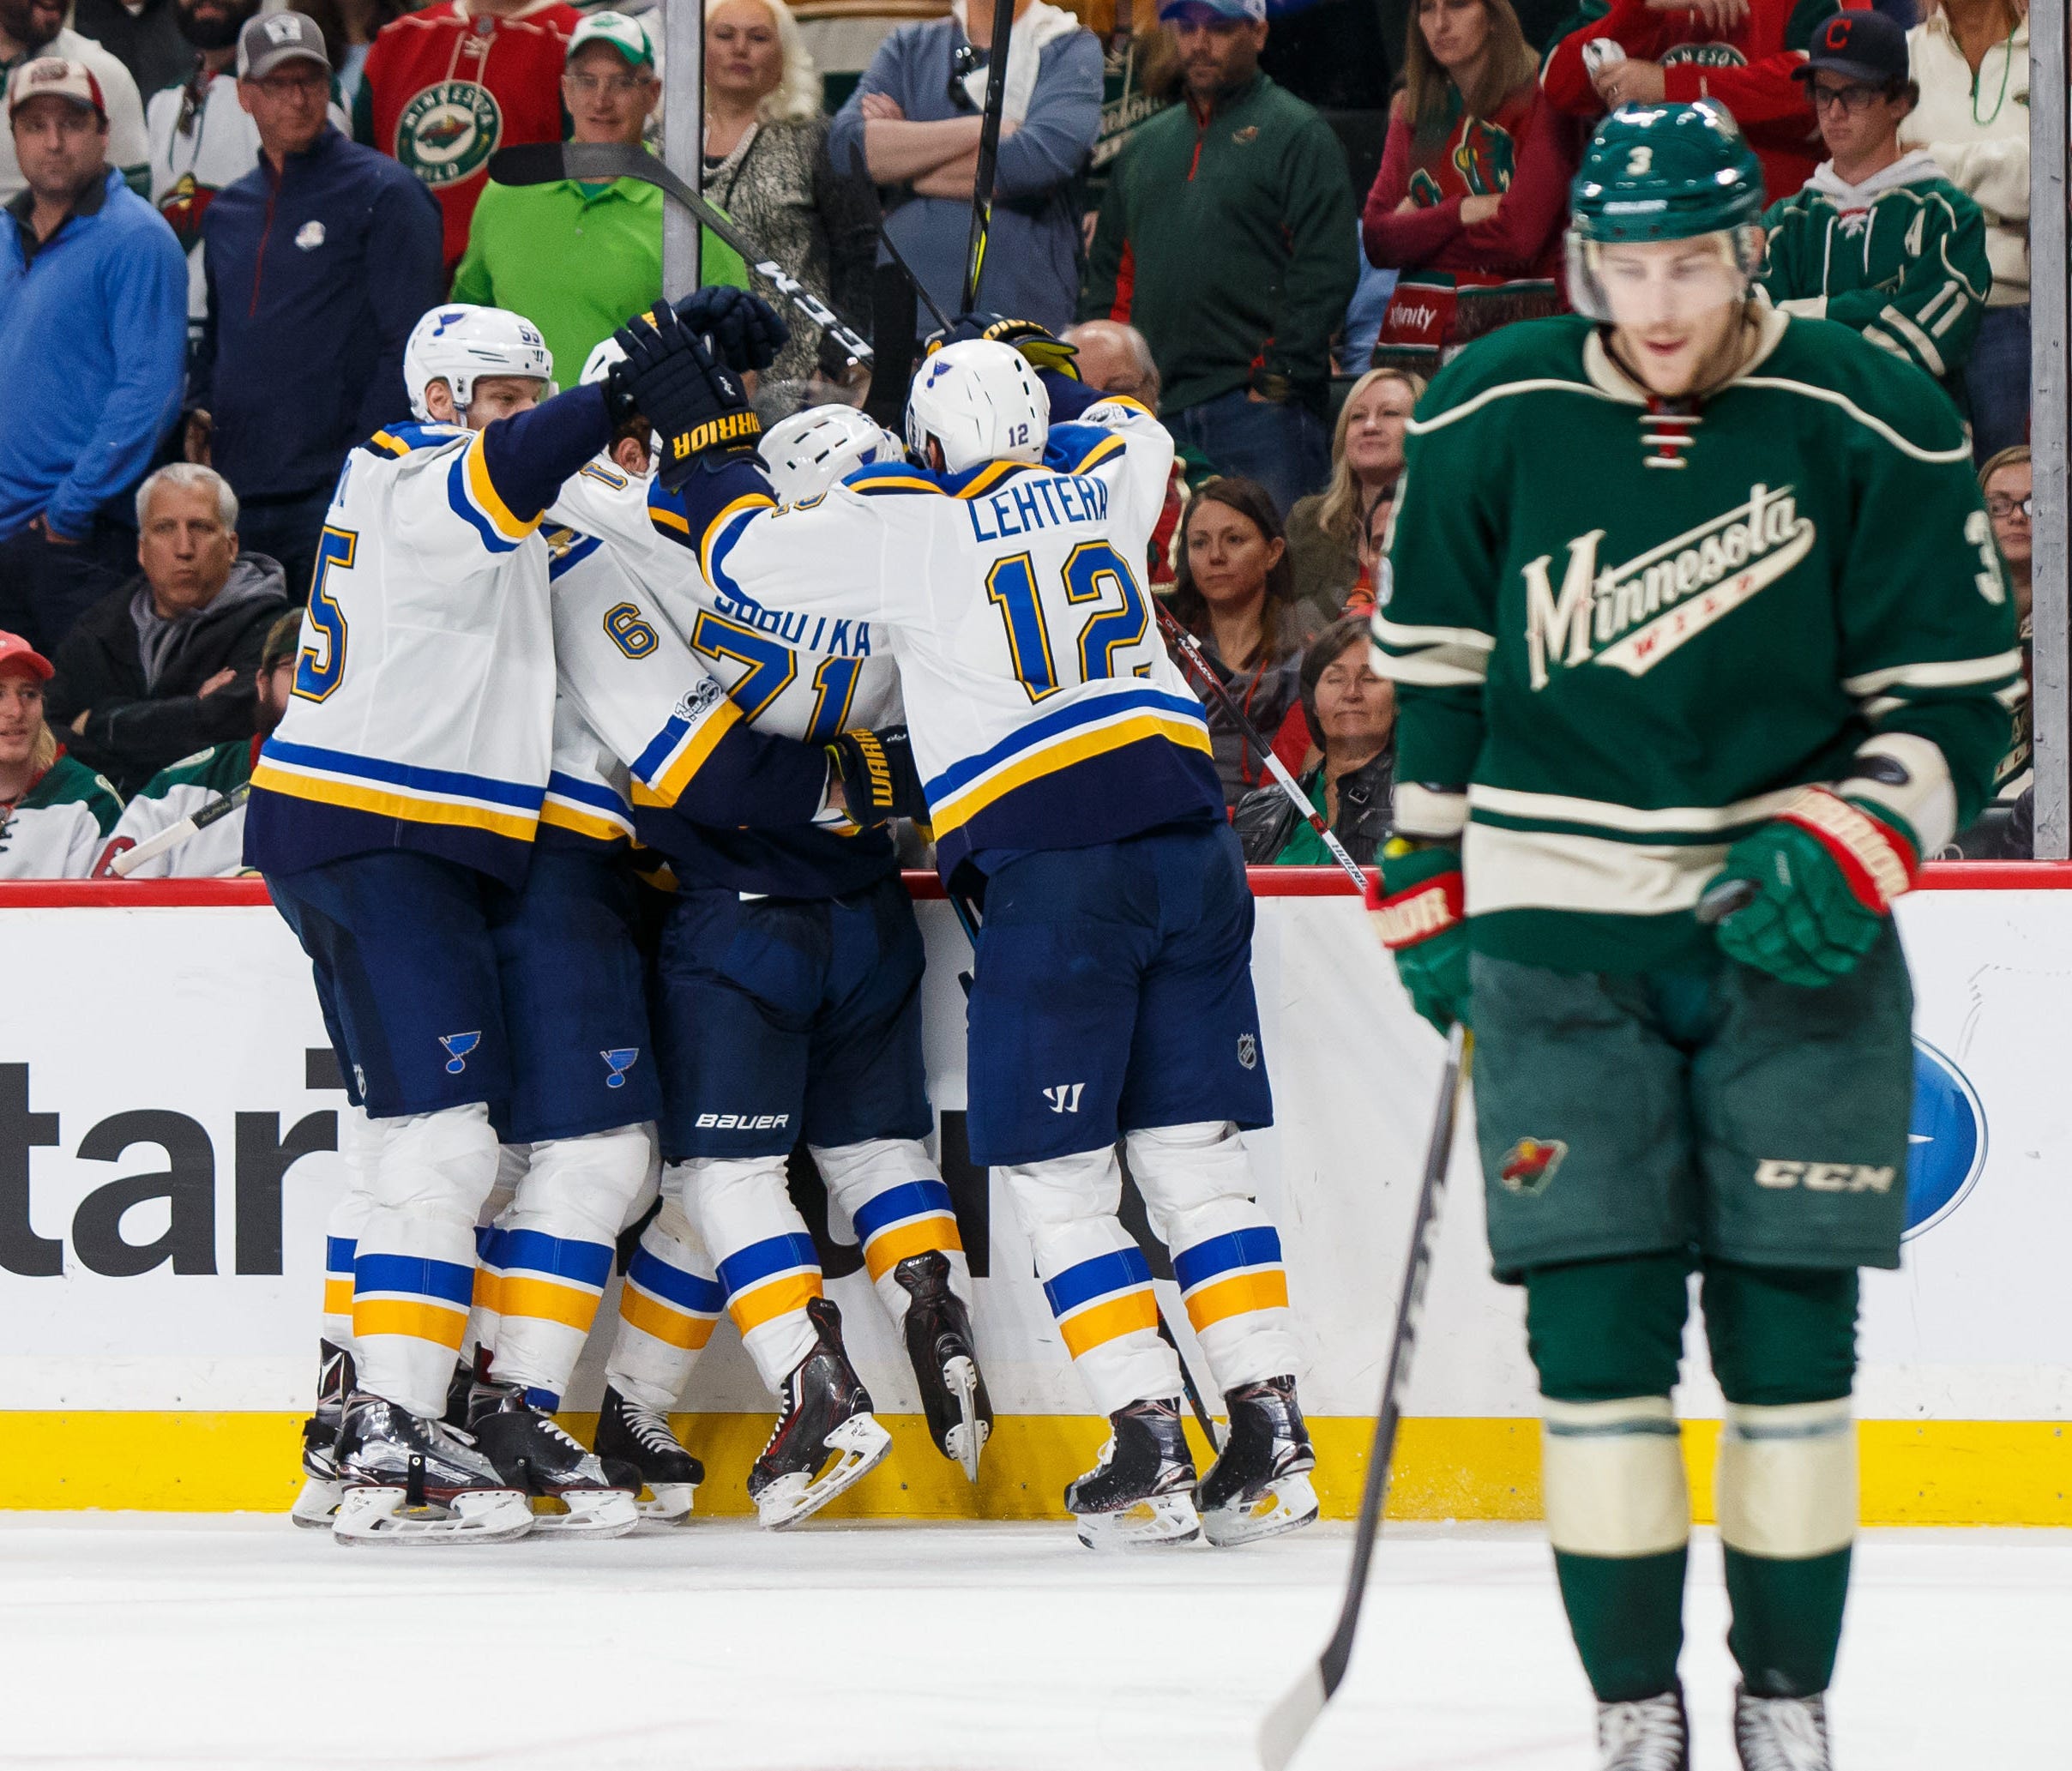 St Louis Blues congratulate St Louis Blues forward Magnus Paajarvi (56) after his game-winning goal in overtime against the Minnesota Wild in Game 5. The goal sent the Blues to the second round to face the Nashville Predators.